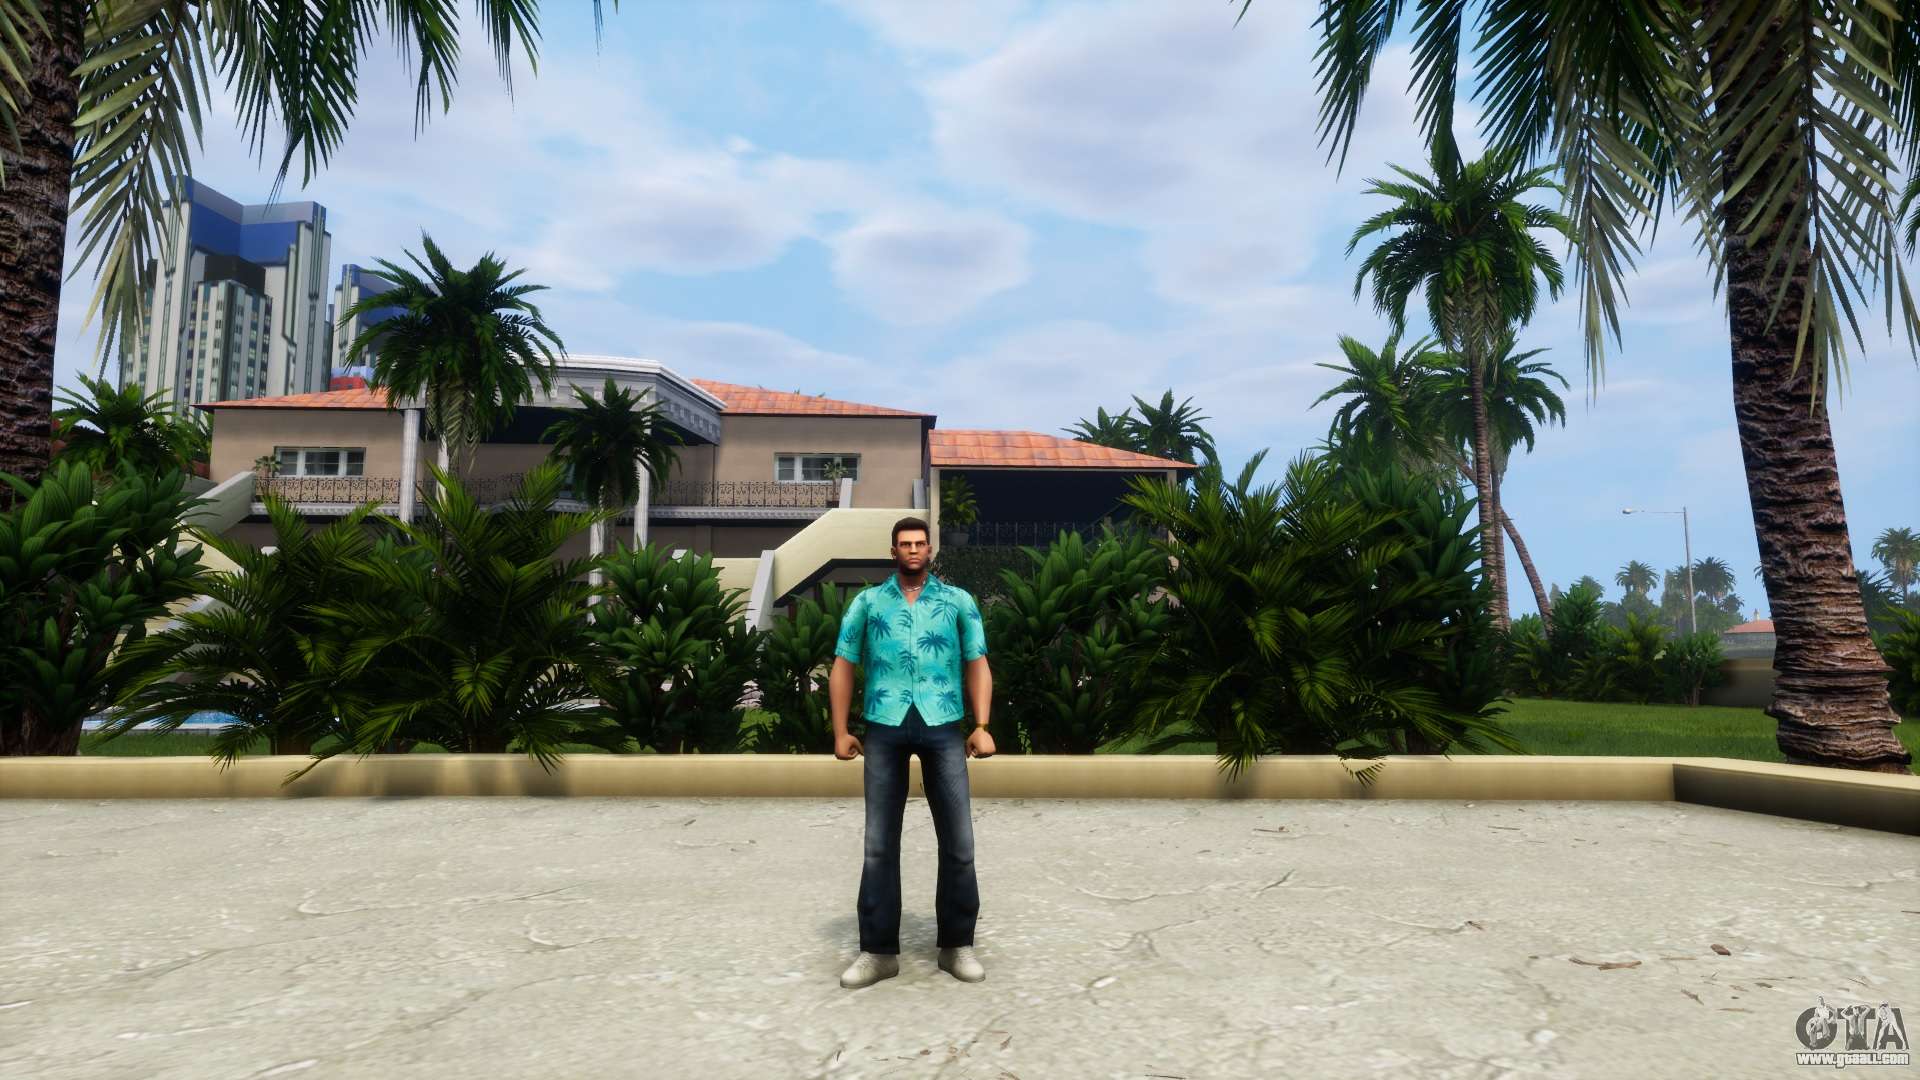 Better Tommy Vercetti for GTA Vice City Definitive Edition